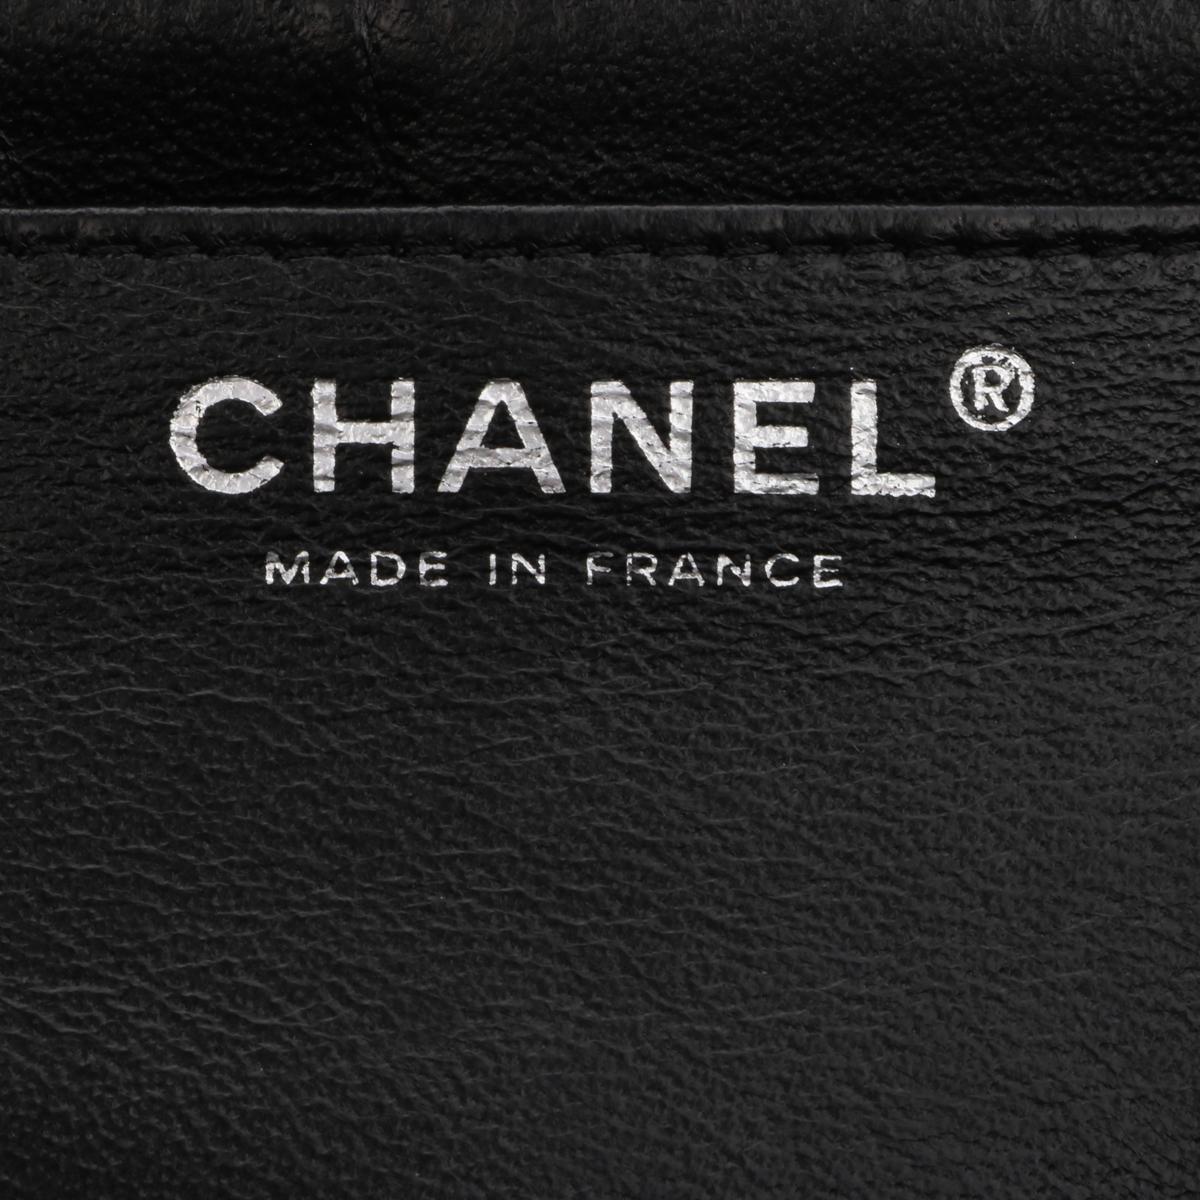 CHANEL Single Flap Jumbo Bag in Black Caviar with Silver-Tone Hardware 2010 For Sale 12